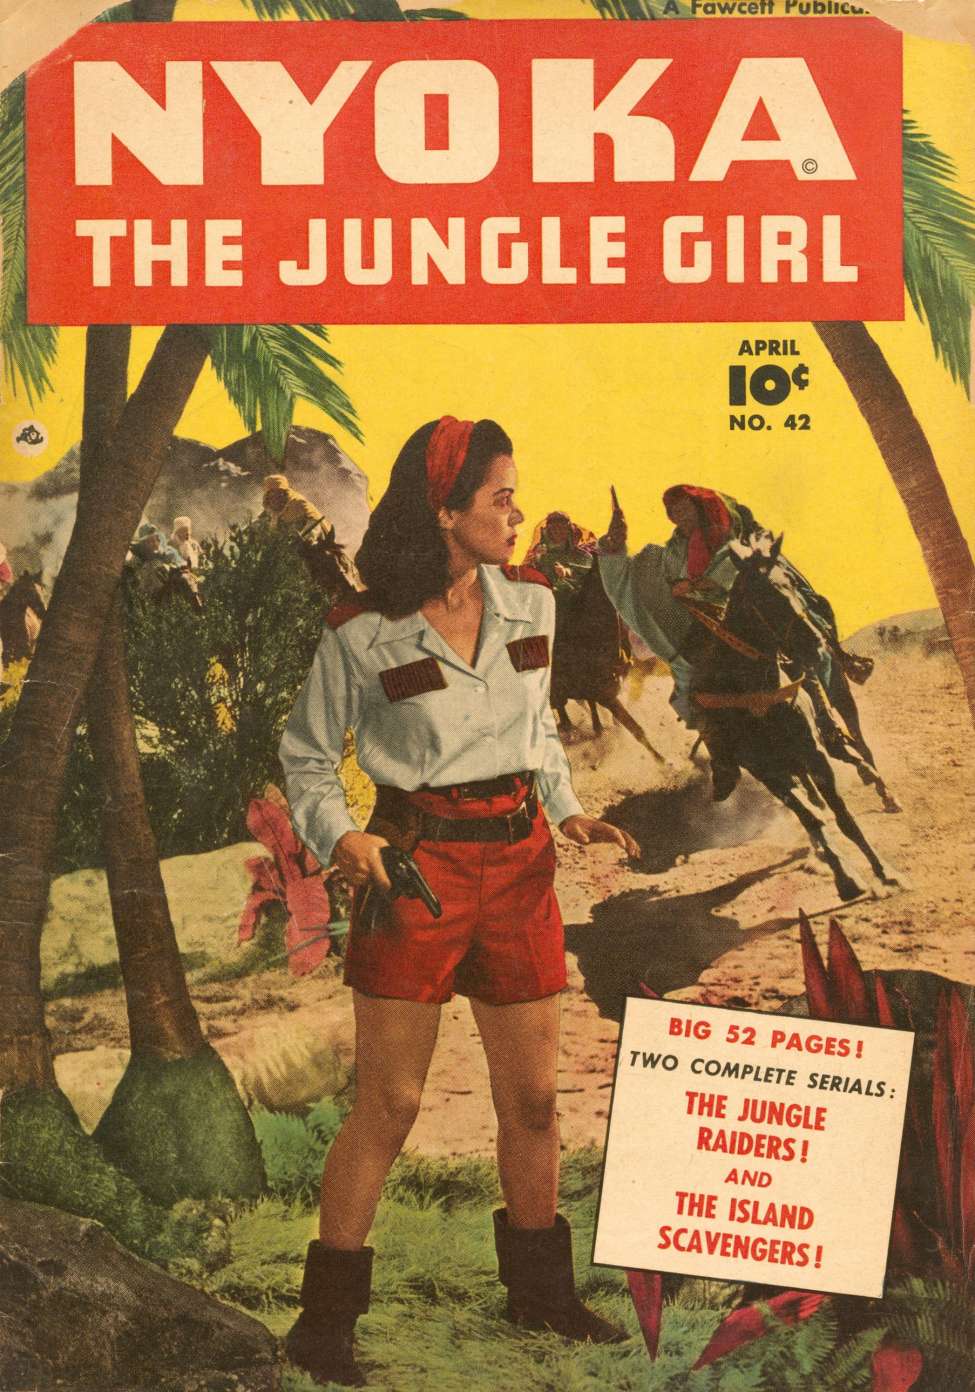 Book Cover For Nyoka the Jungle Girl 42 - Version 2